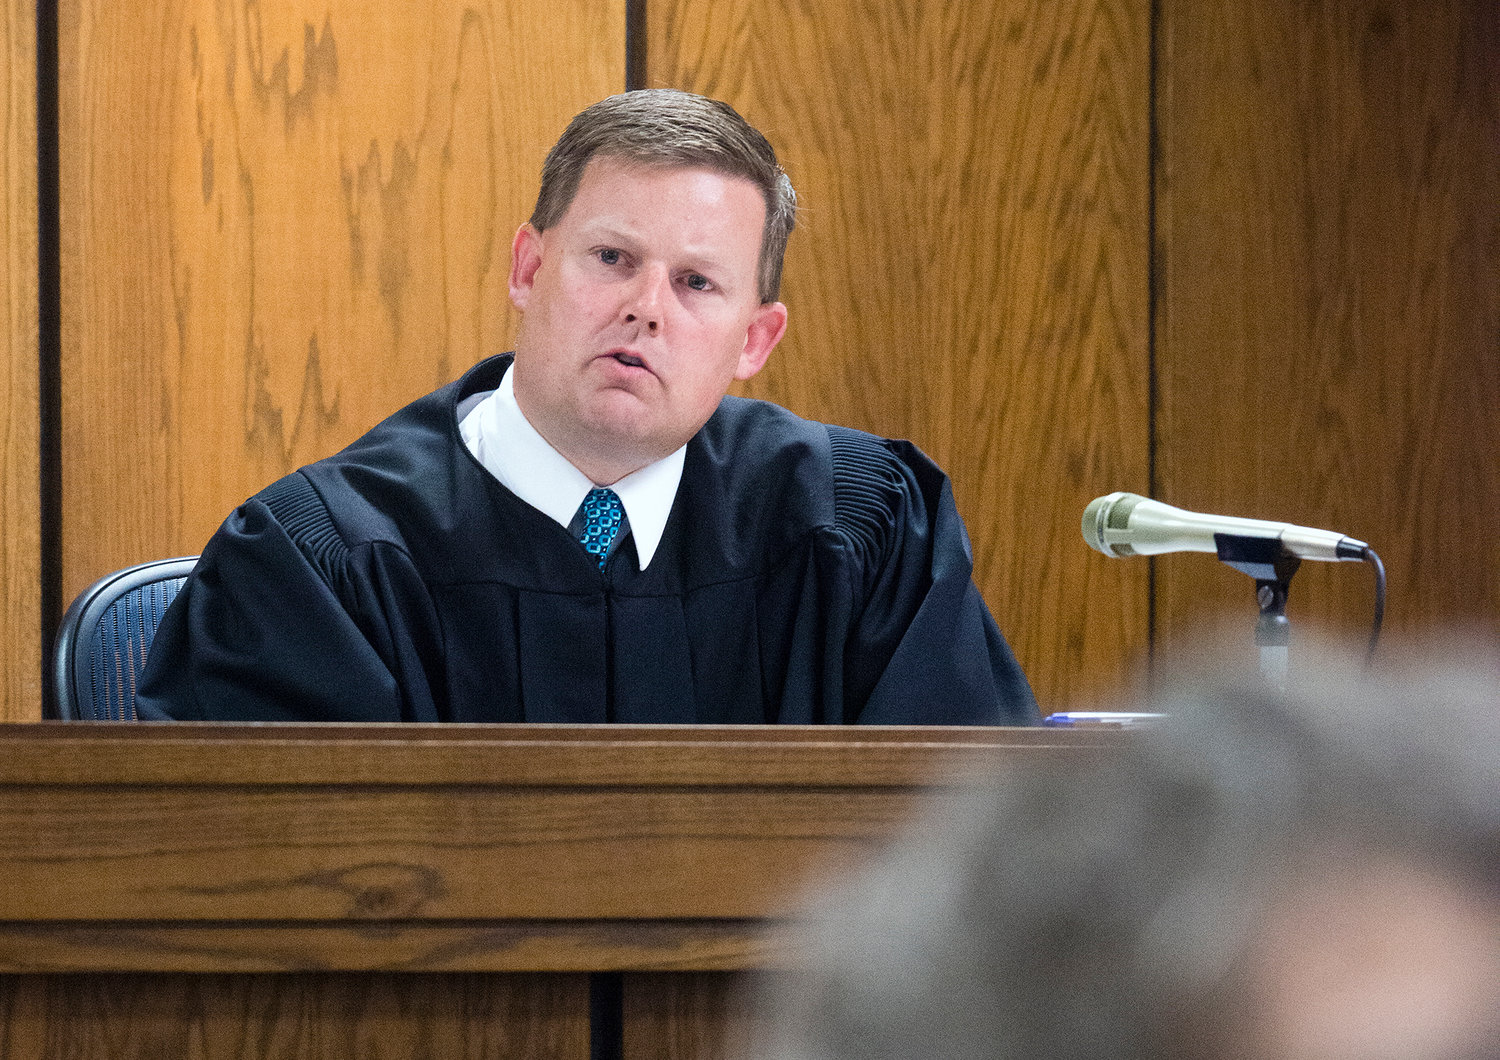 Lewis County District Court Judge R.W. Buzzard responds to arguments made during a hearing in 2014 at the Lewis County Law and Justice Center in Chehalis.